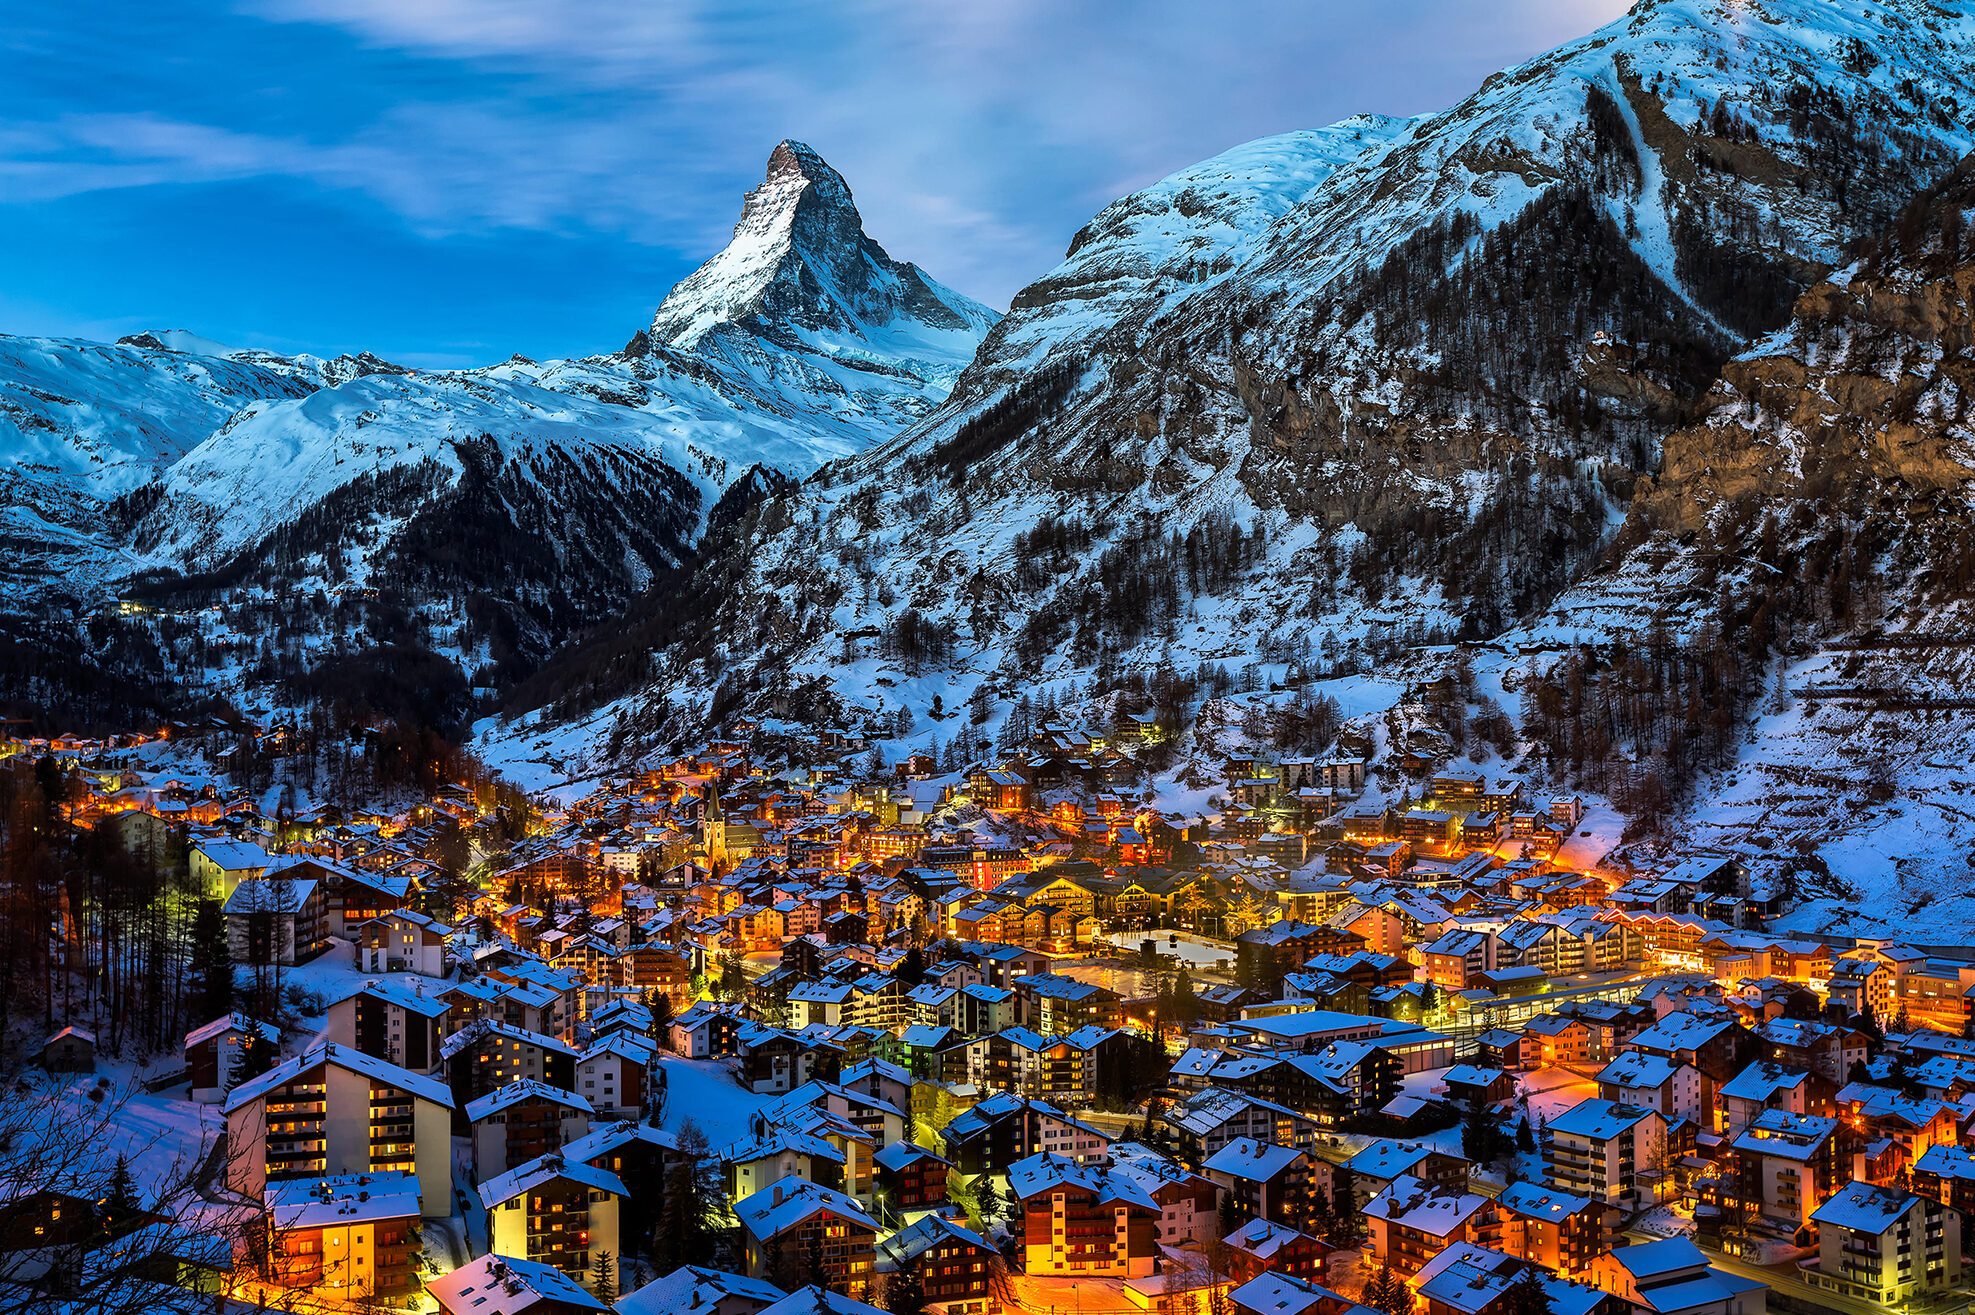 The Most Beautiful Towns You Have to Visit in the Alps